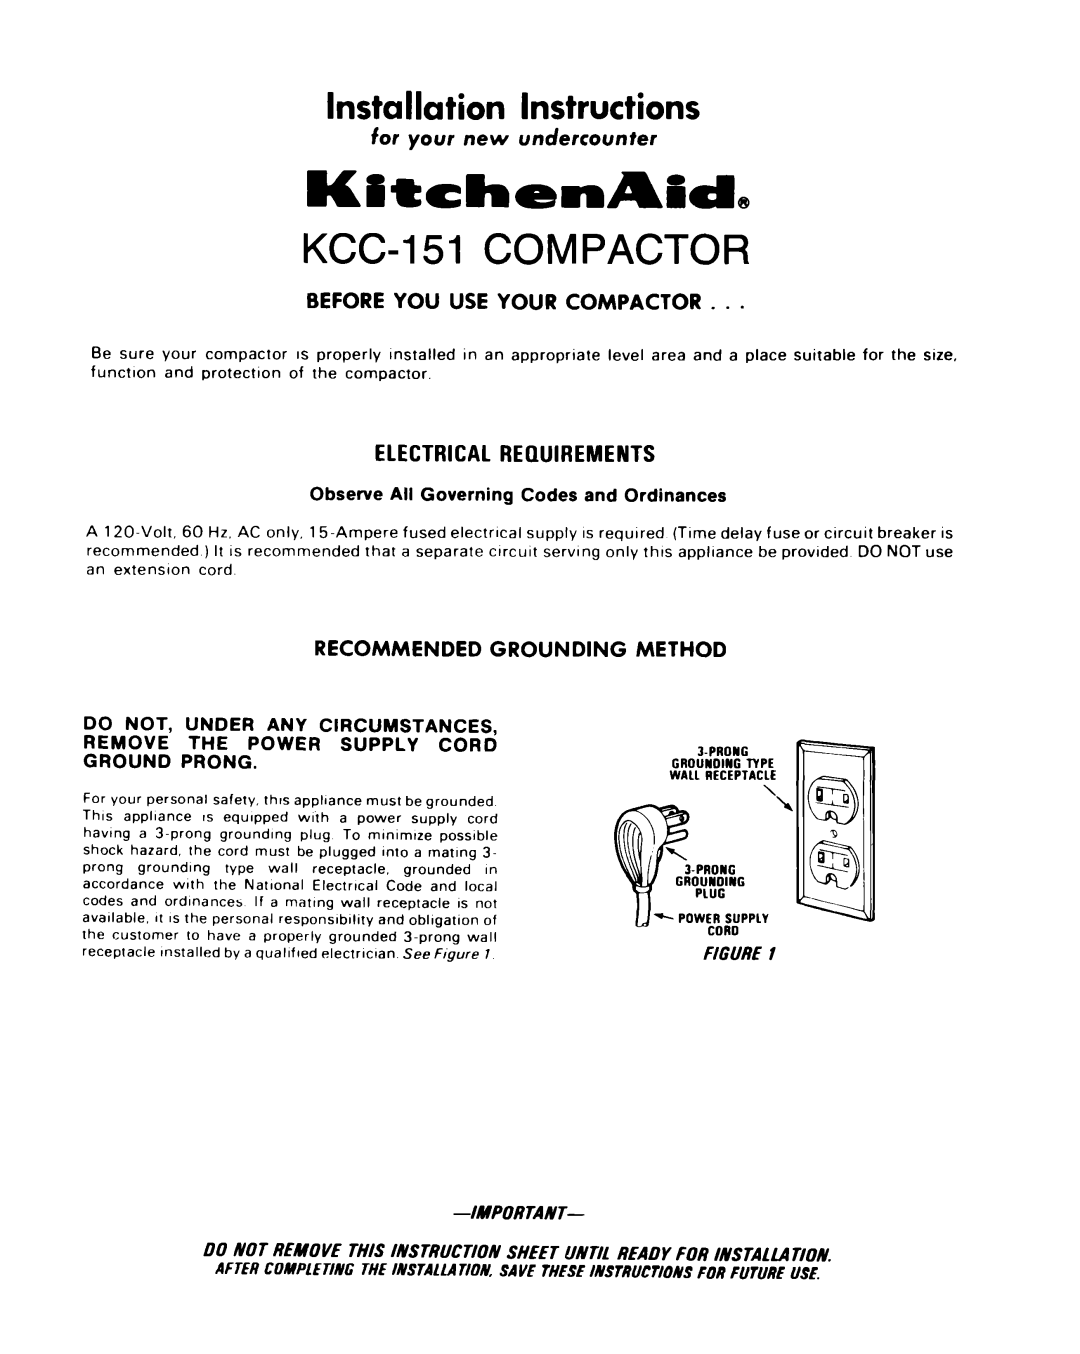 KitchenAid KCC-151 installation instructions for your new undercounter, Before You Use Your Compactor, Fjgurei, lMPORlANT 